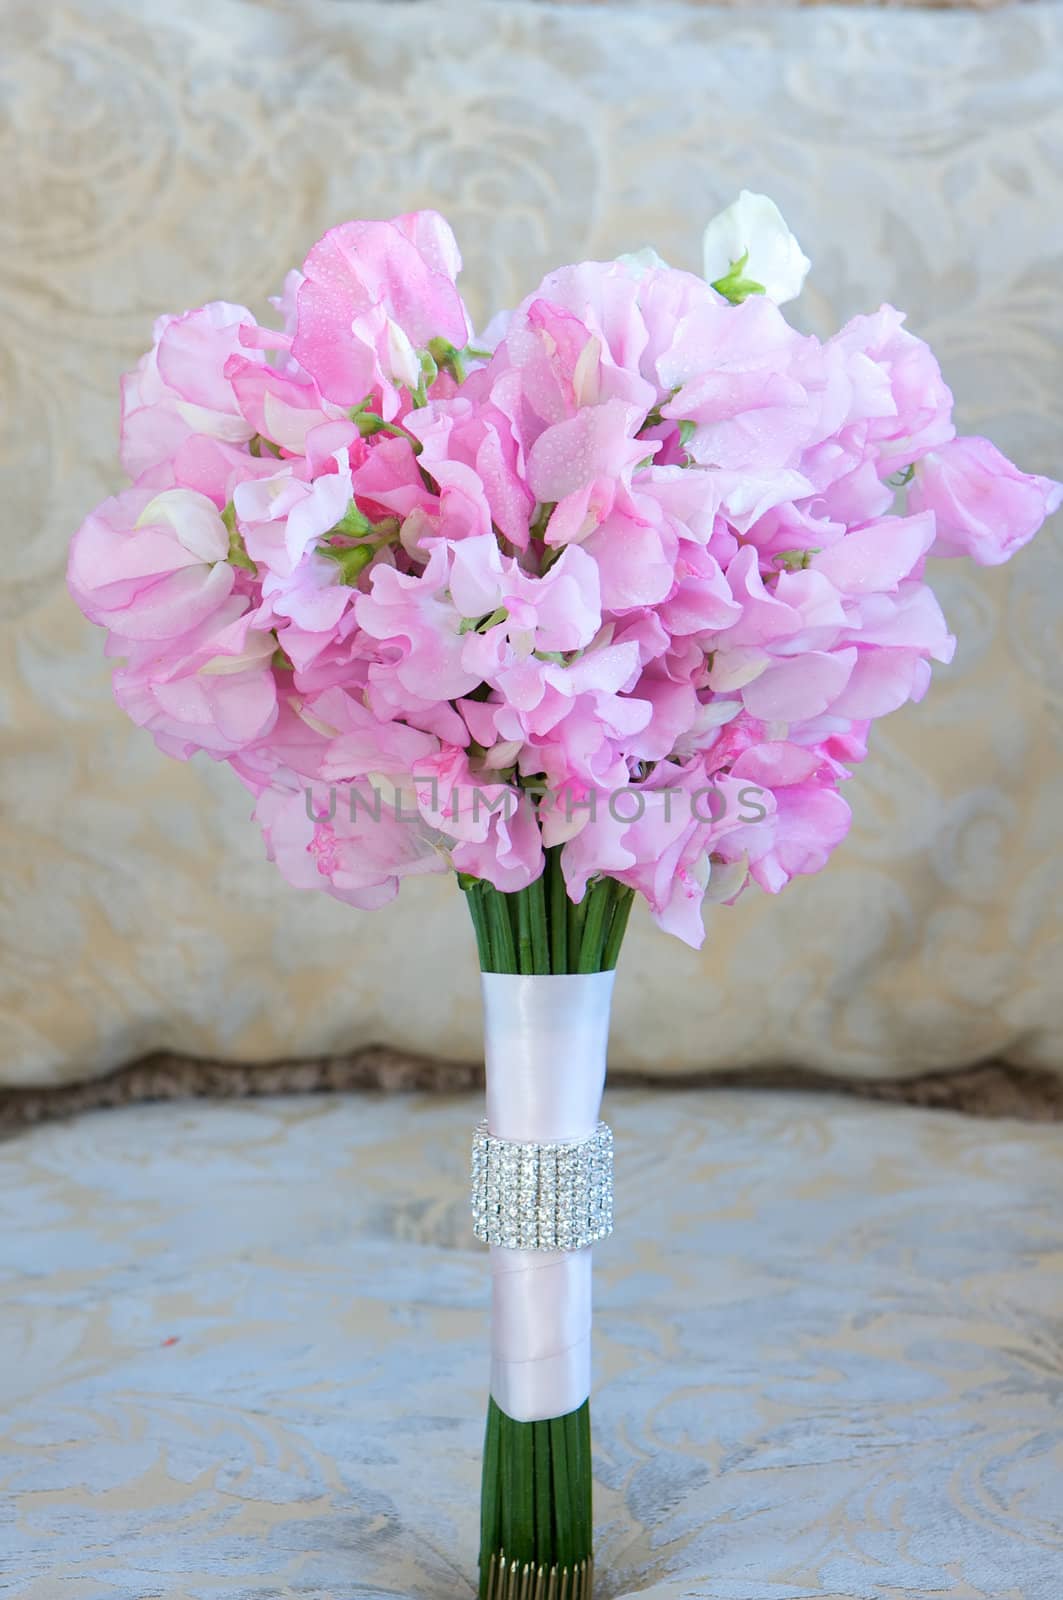 A colorful pink bridal bouquet of flowers